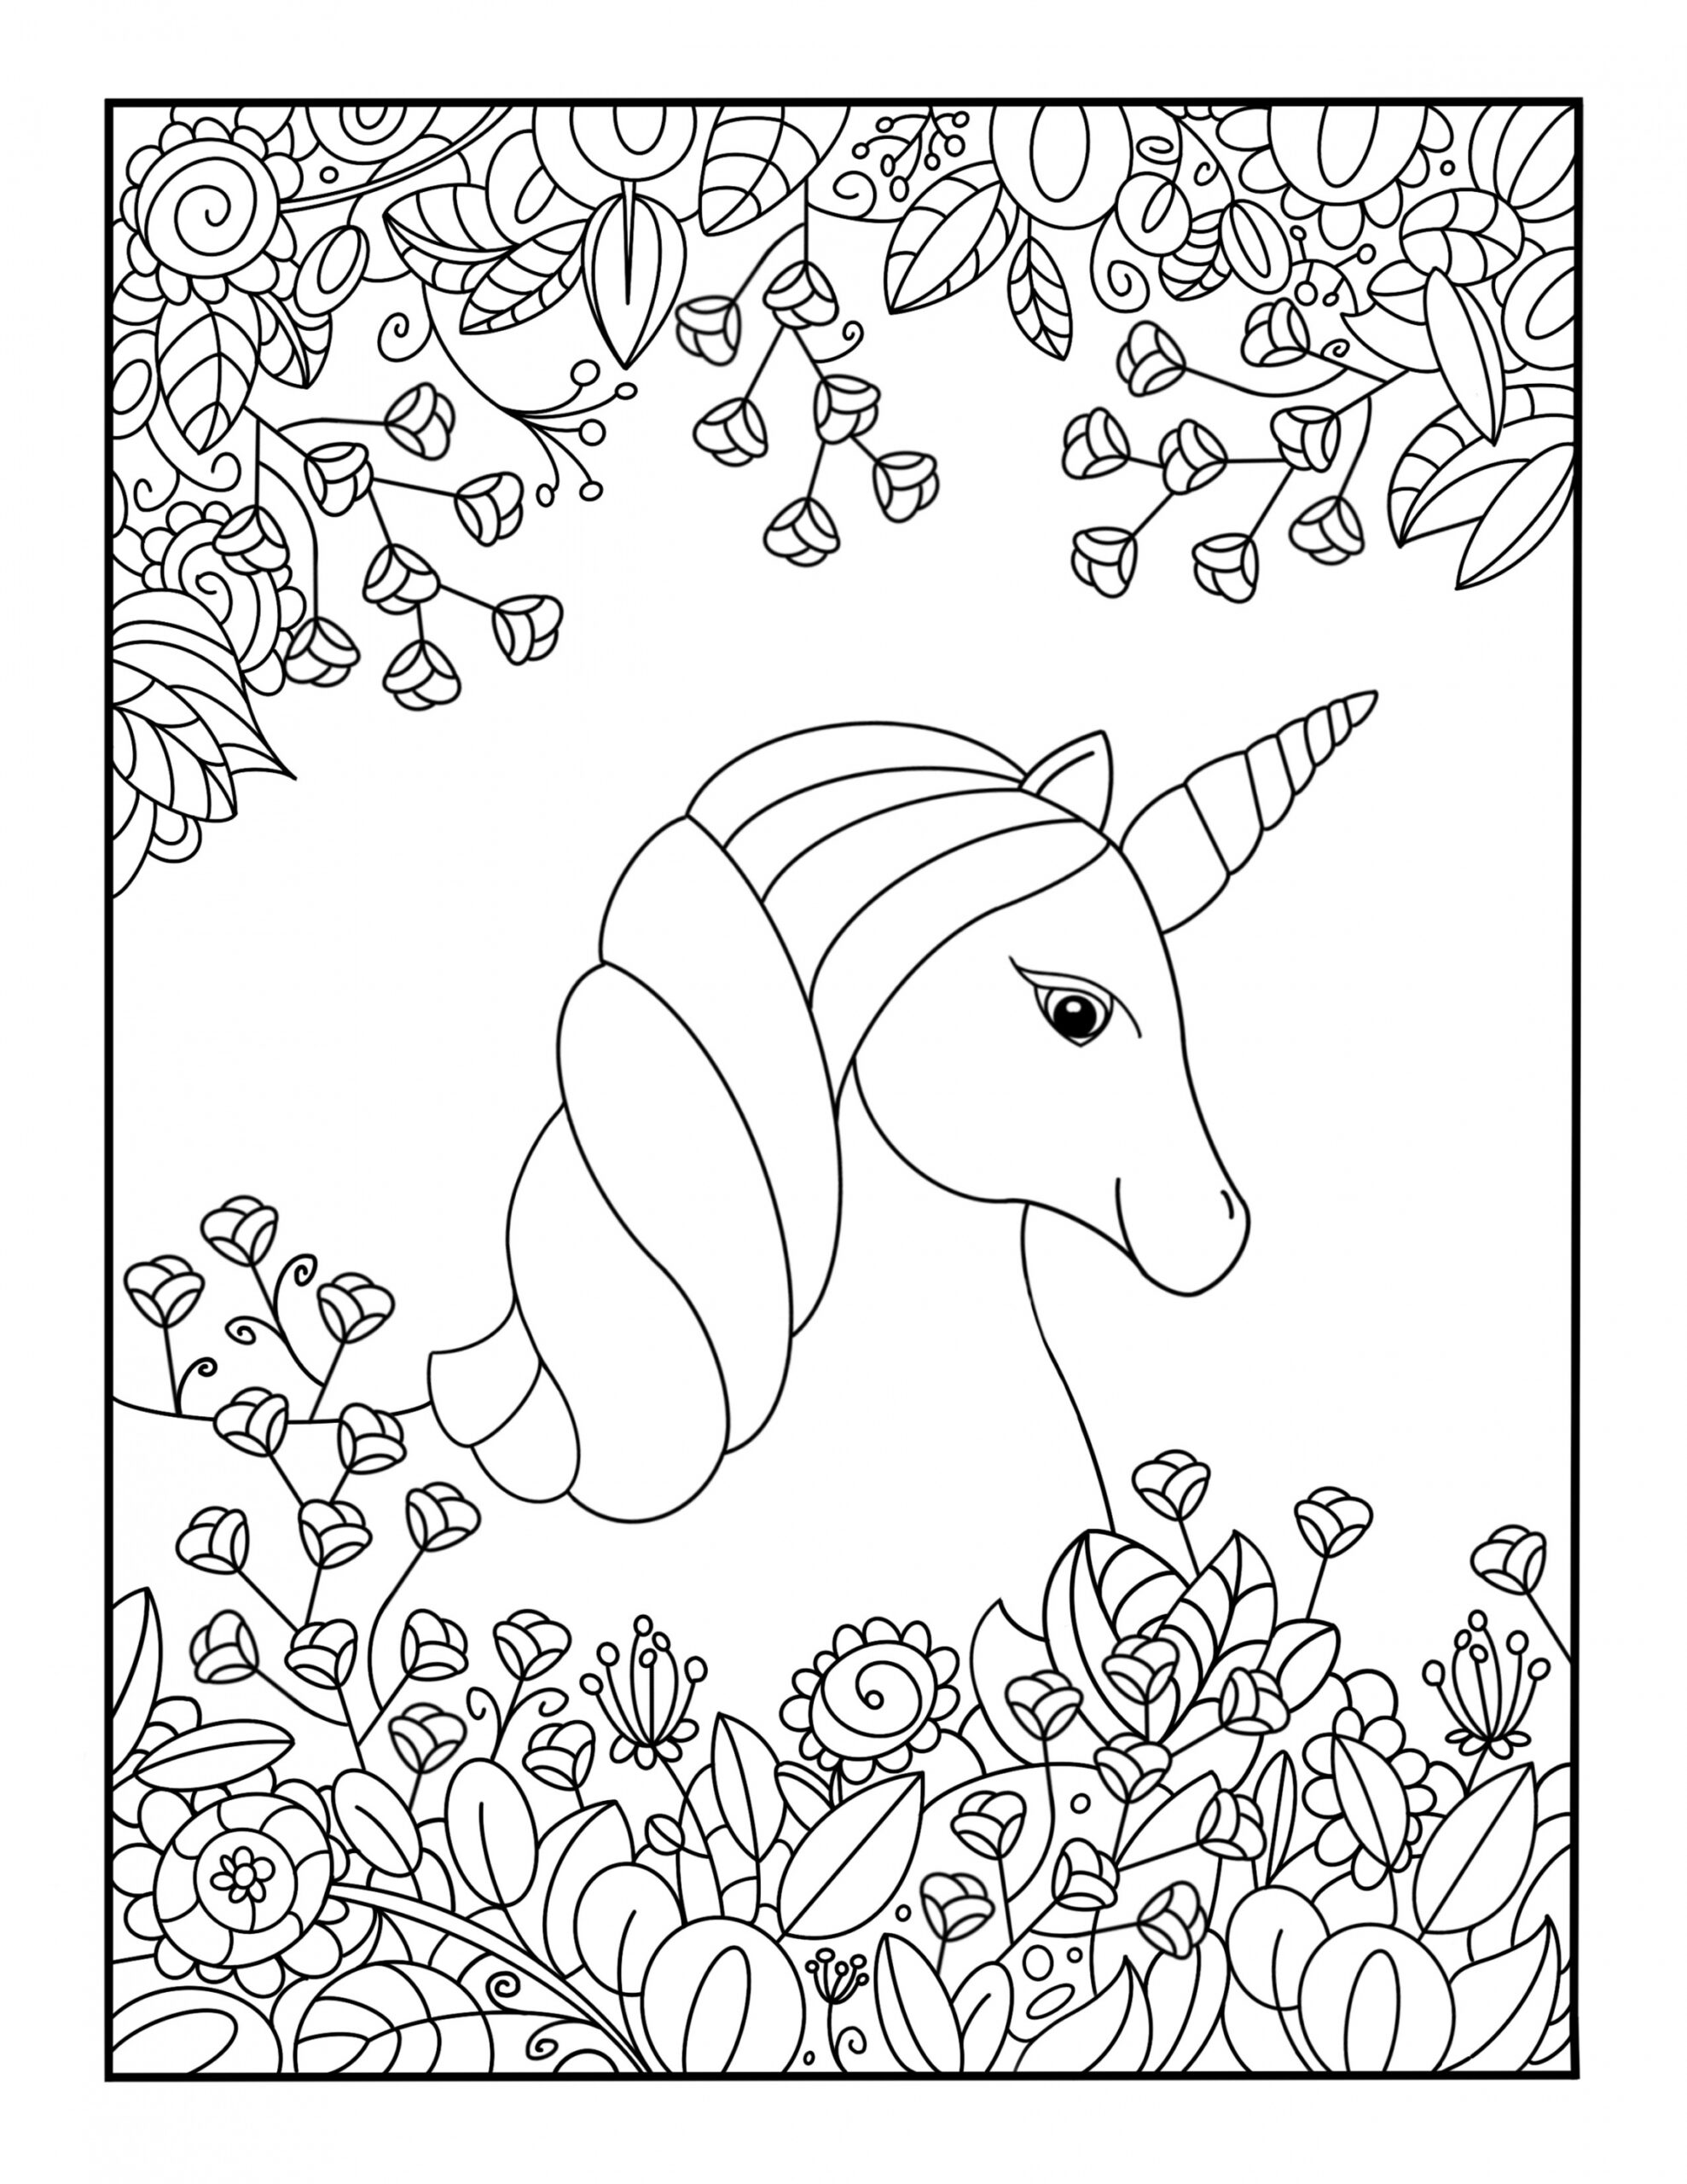 Free Unicorn Coloring Pages - Daily Printables - FREE Printables - Adult Unicorn Coloring Pages